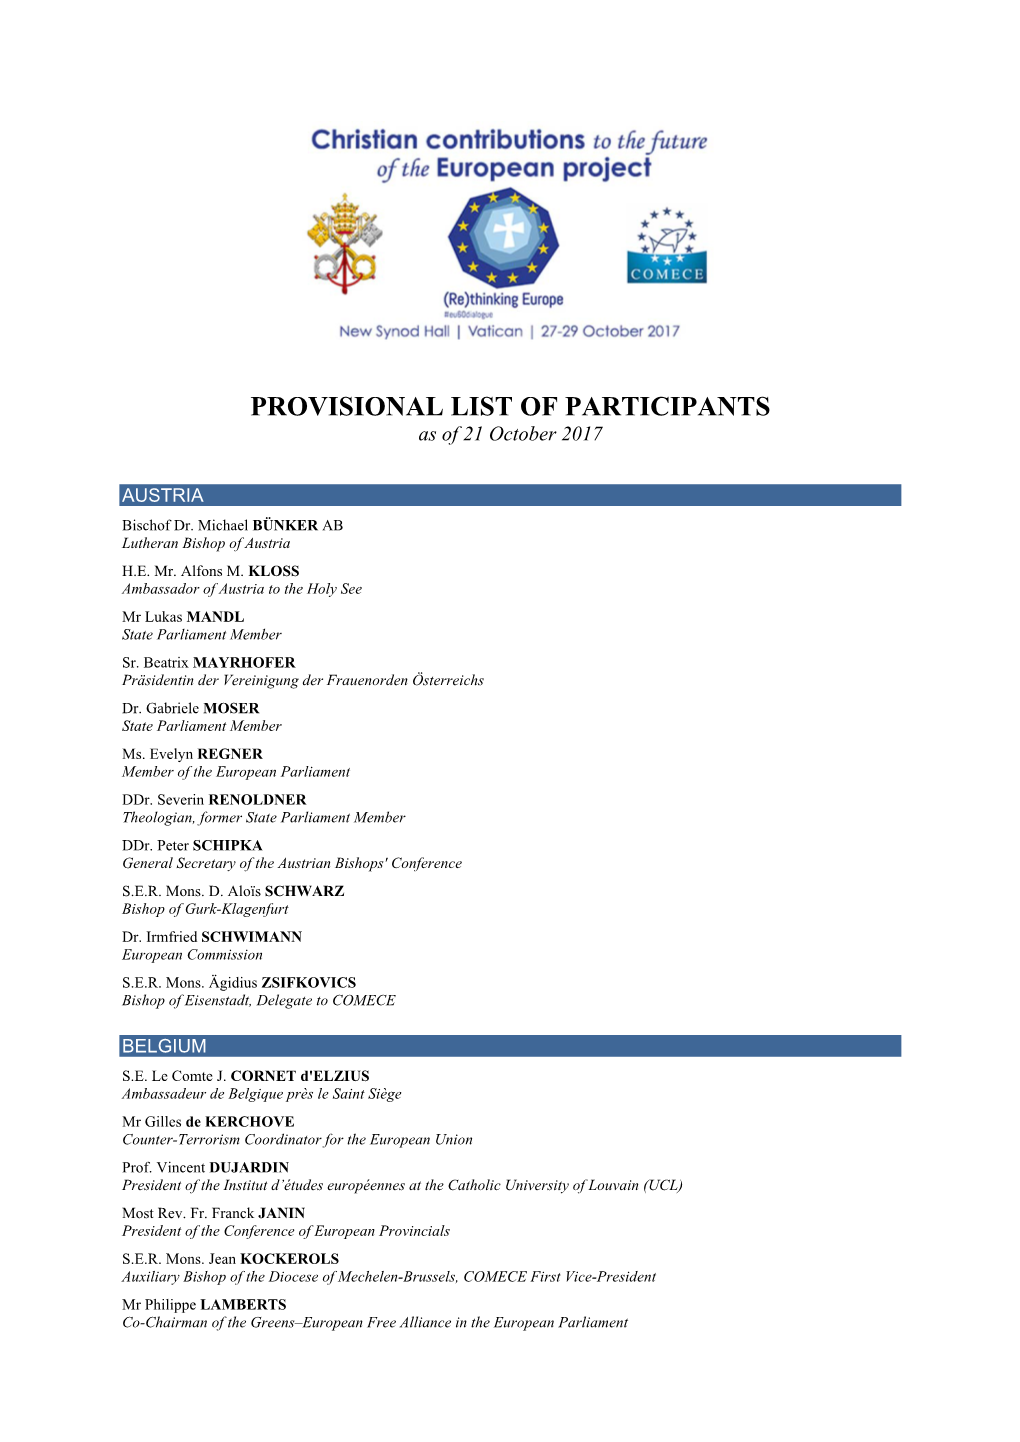 PROVISIONAL LIST of PARTICIPANTS As of 21 October 2017